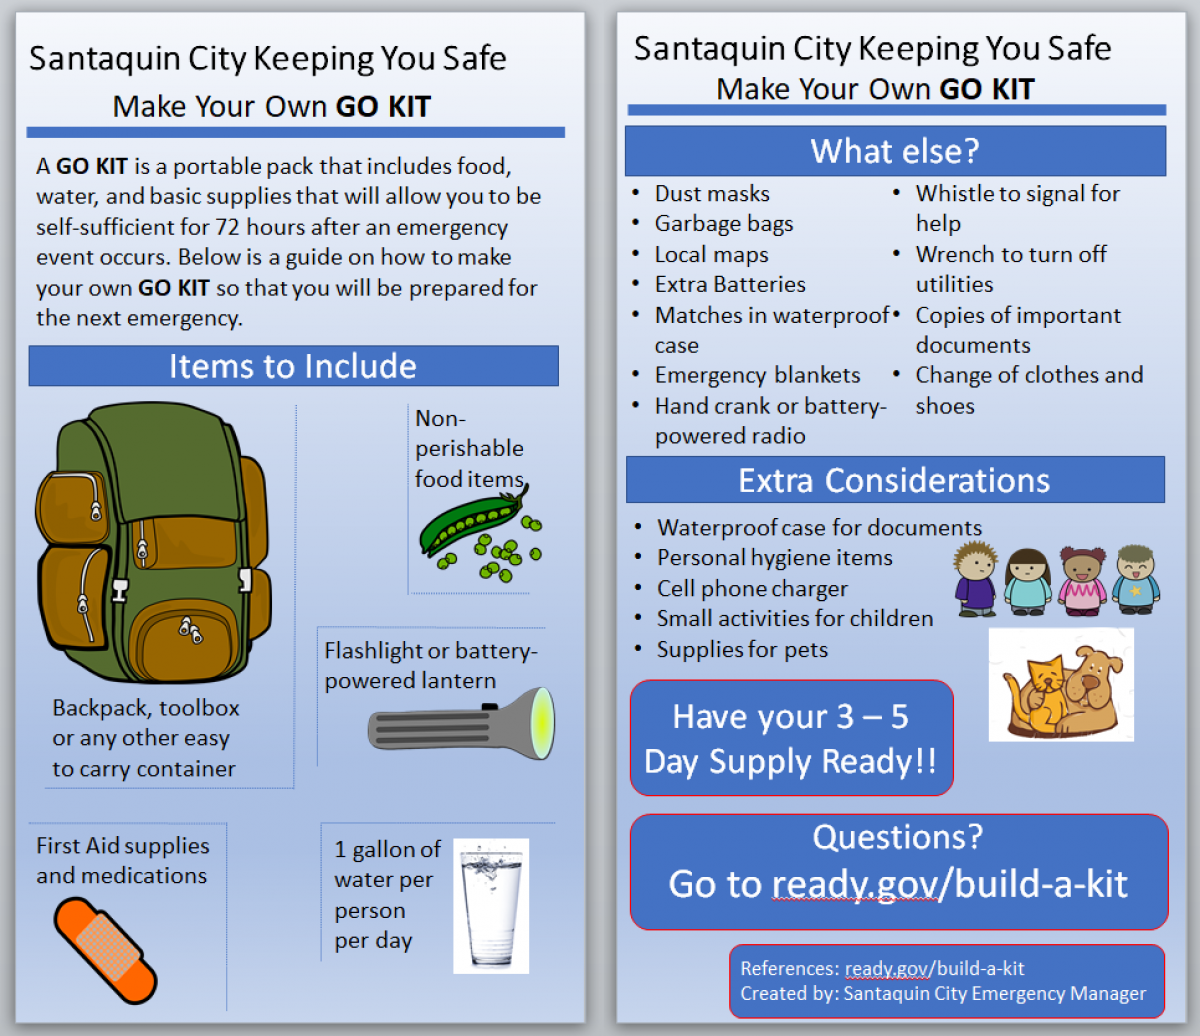 Santaquin City Keeping You Safe, make your own go kit. A go kit is a portable pack that includes food, water, and basic supplies